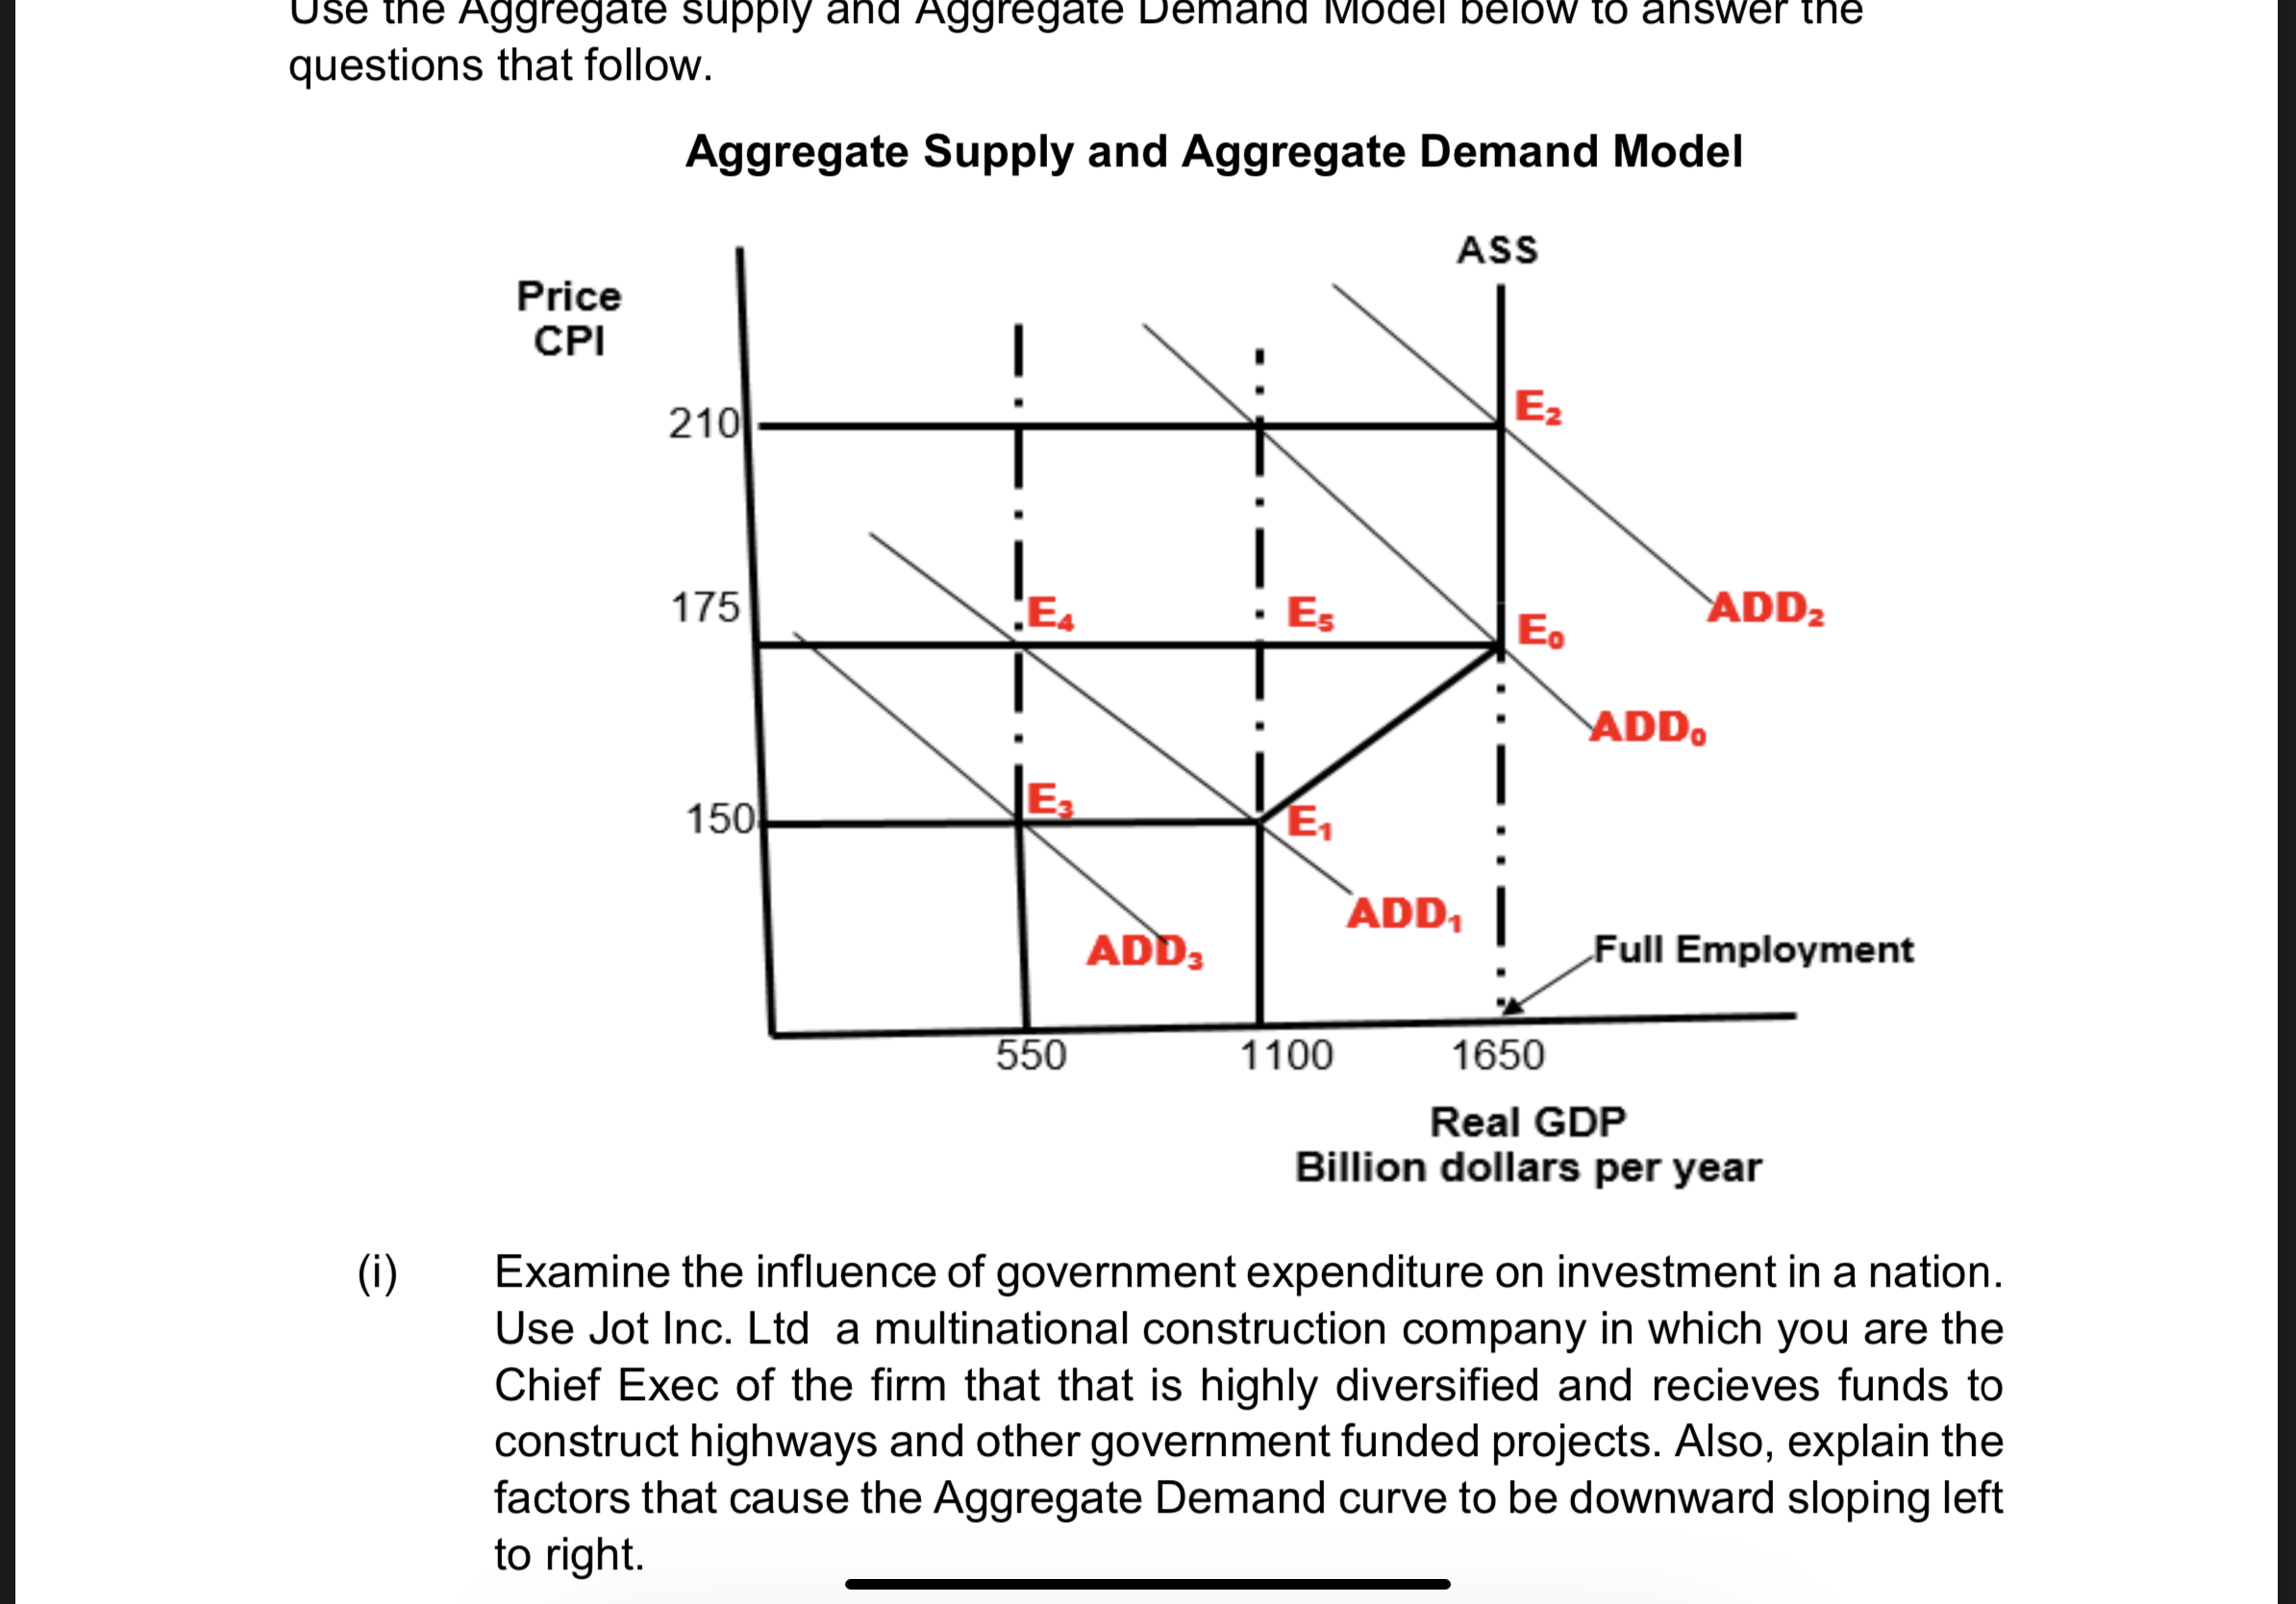 Examine the influence of government expenditure on investment in a nation.
Use Jot Inc. Ltd a multinational construction company in which you are the
Chief Exec of the firm that that is highly diversified and recieves funds to
construct highways and other government funded projects. Also, explain the
factors that cause the Aggregate Demand curve to be downward sloping left
to right.
